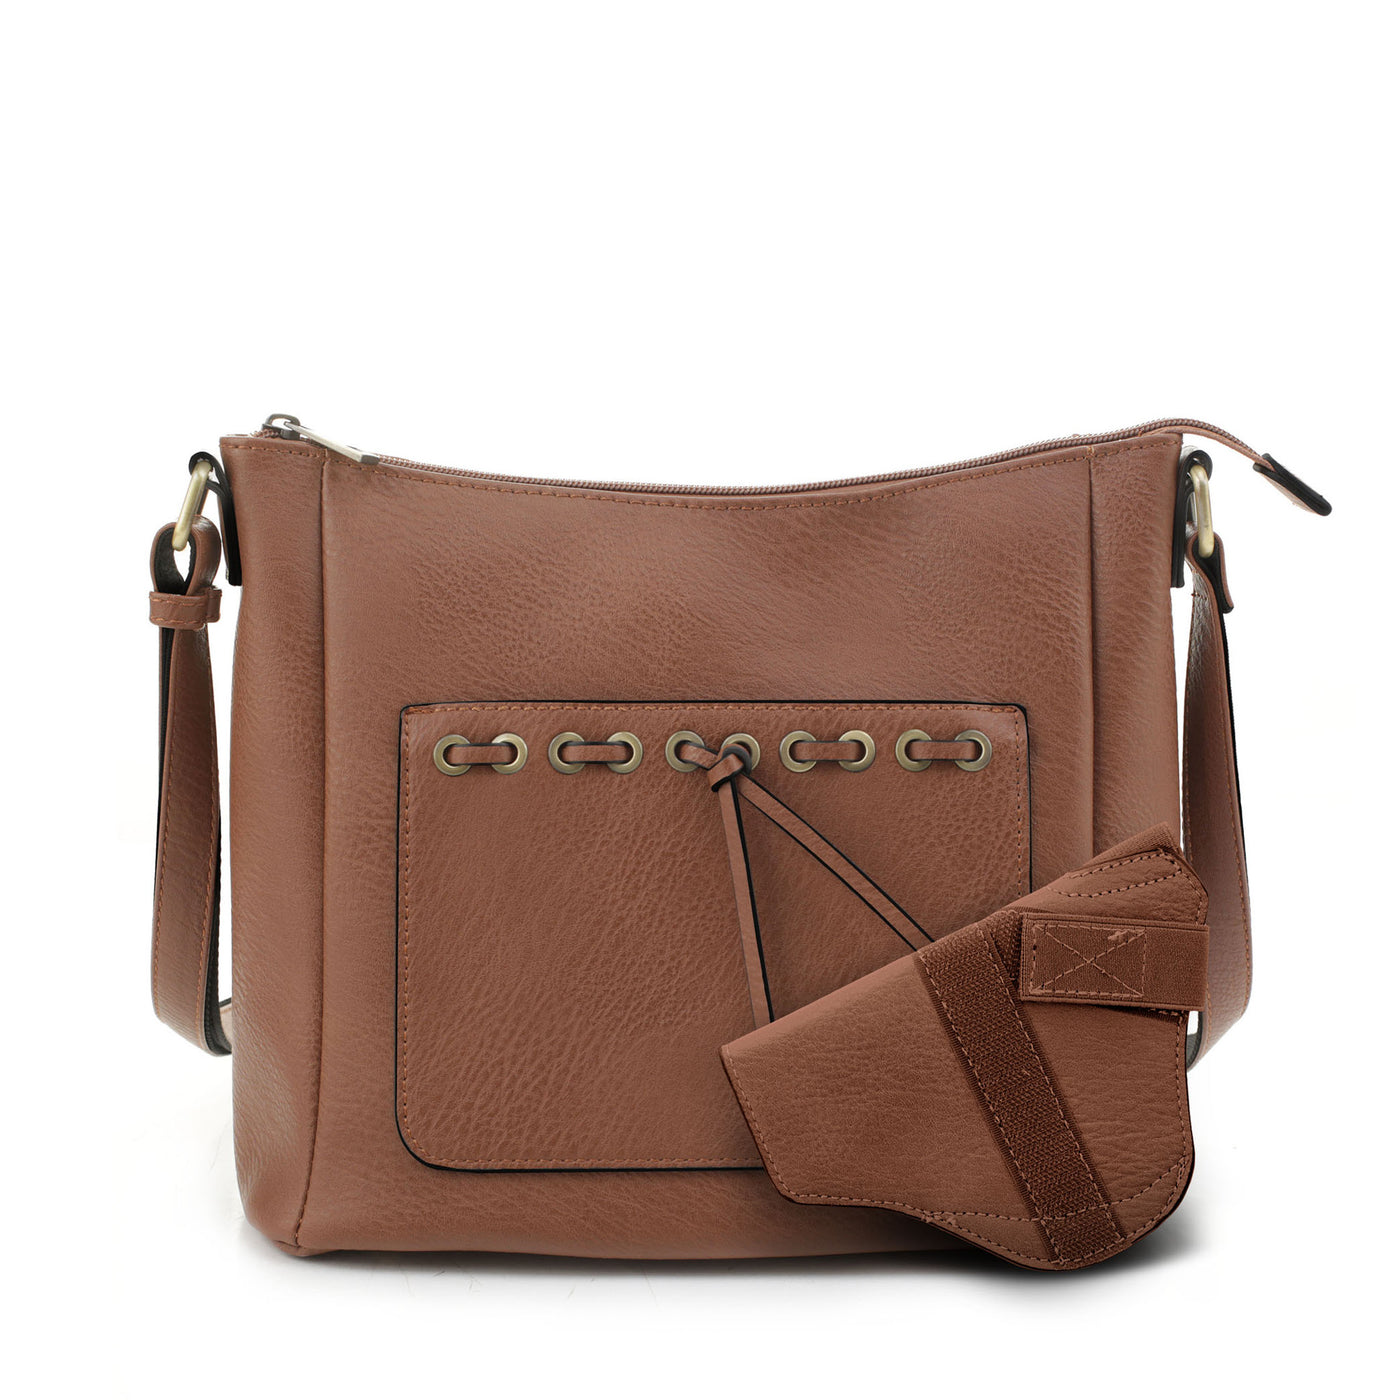 Esther Concealed Carry Lock and Key Crossbody